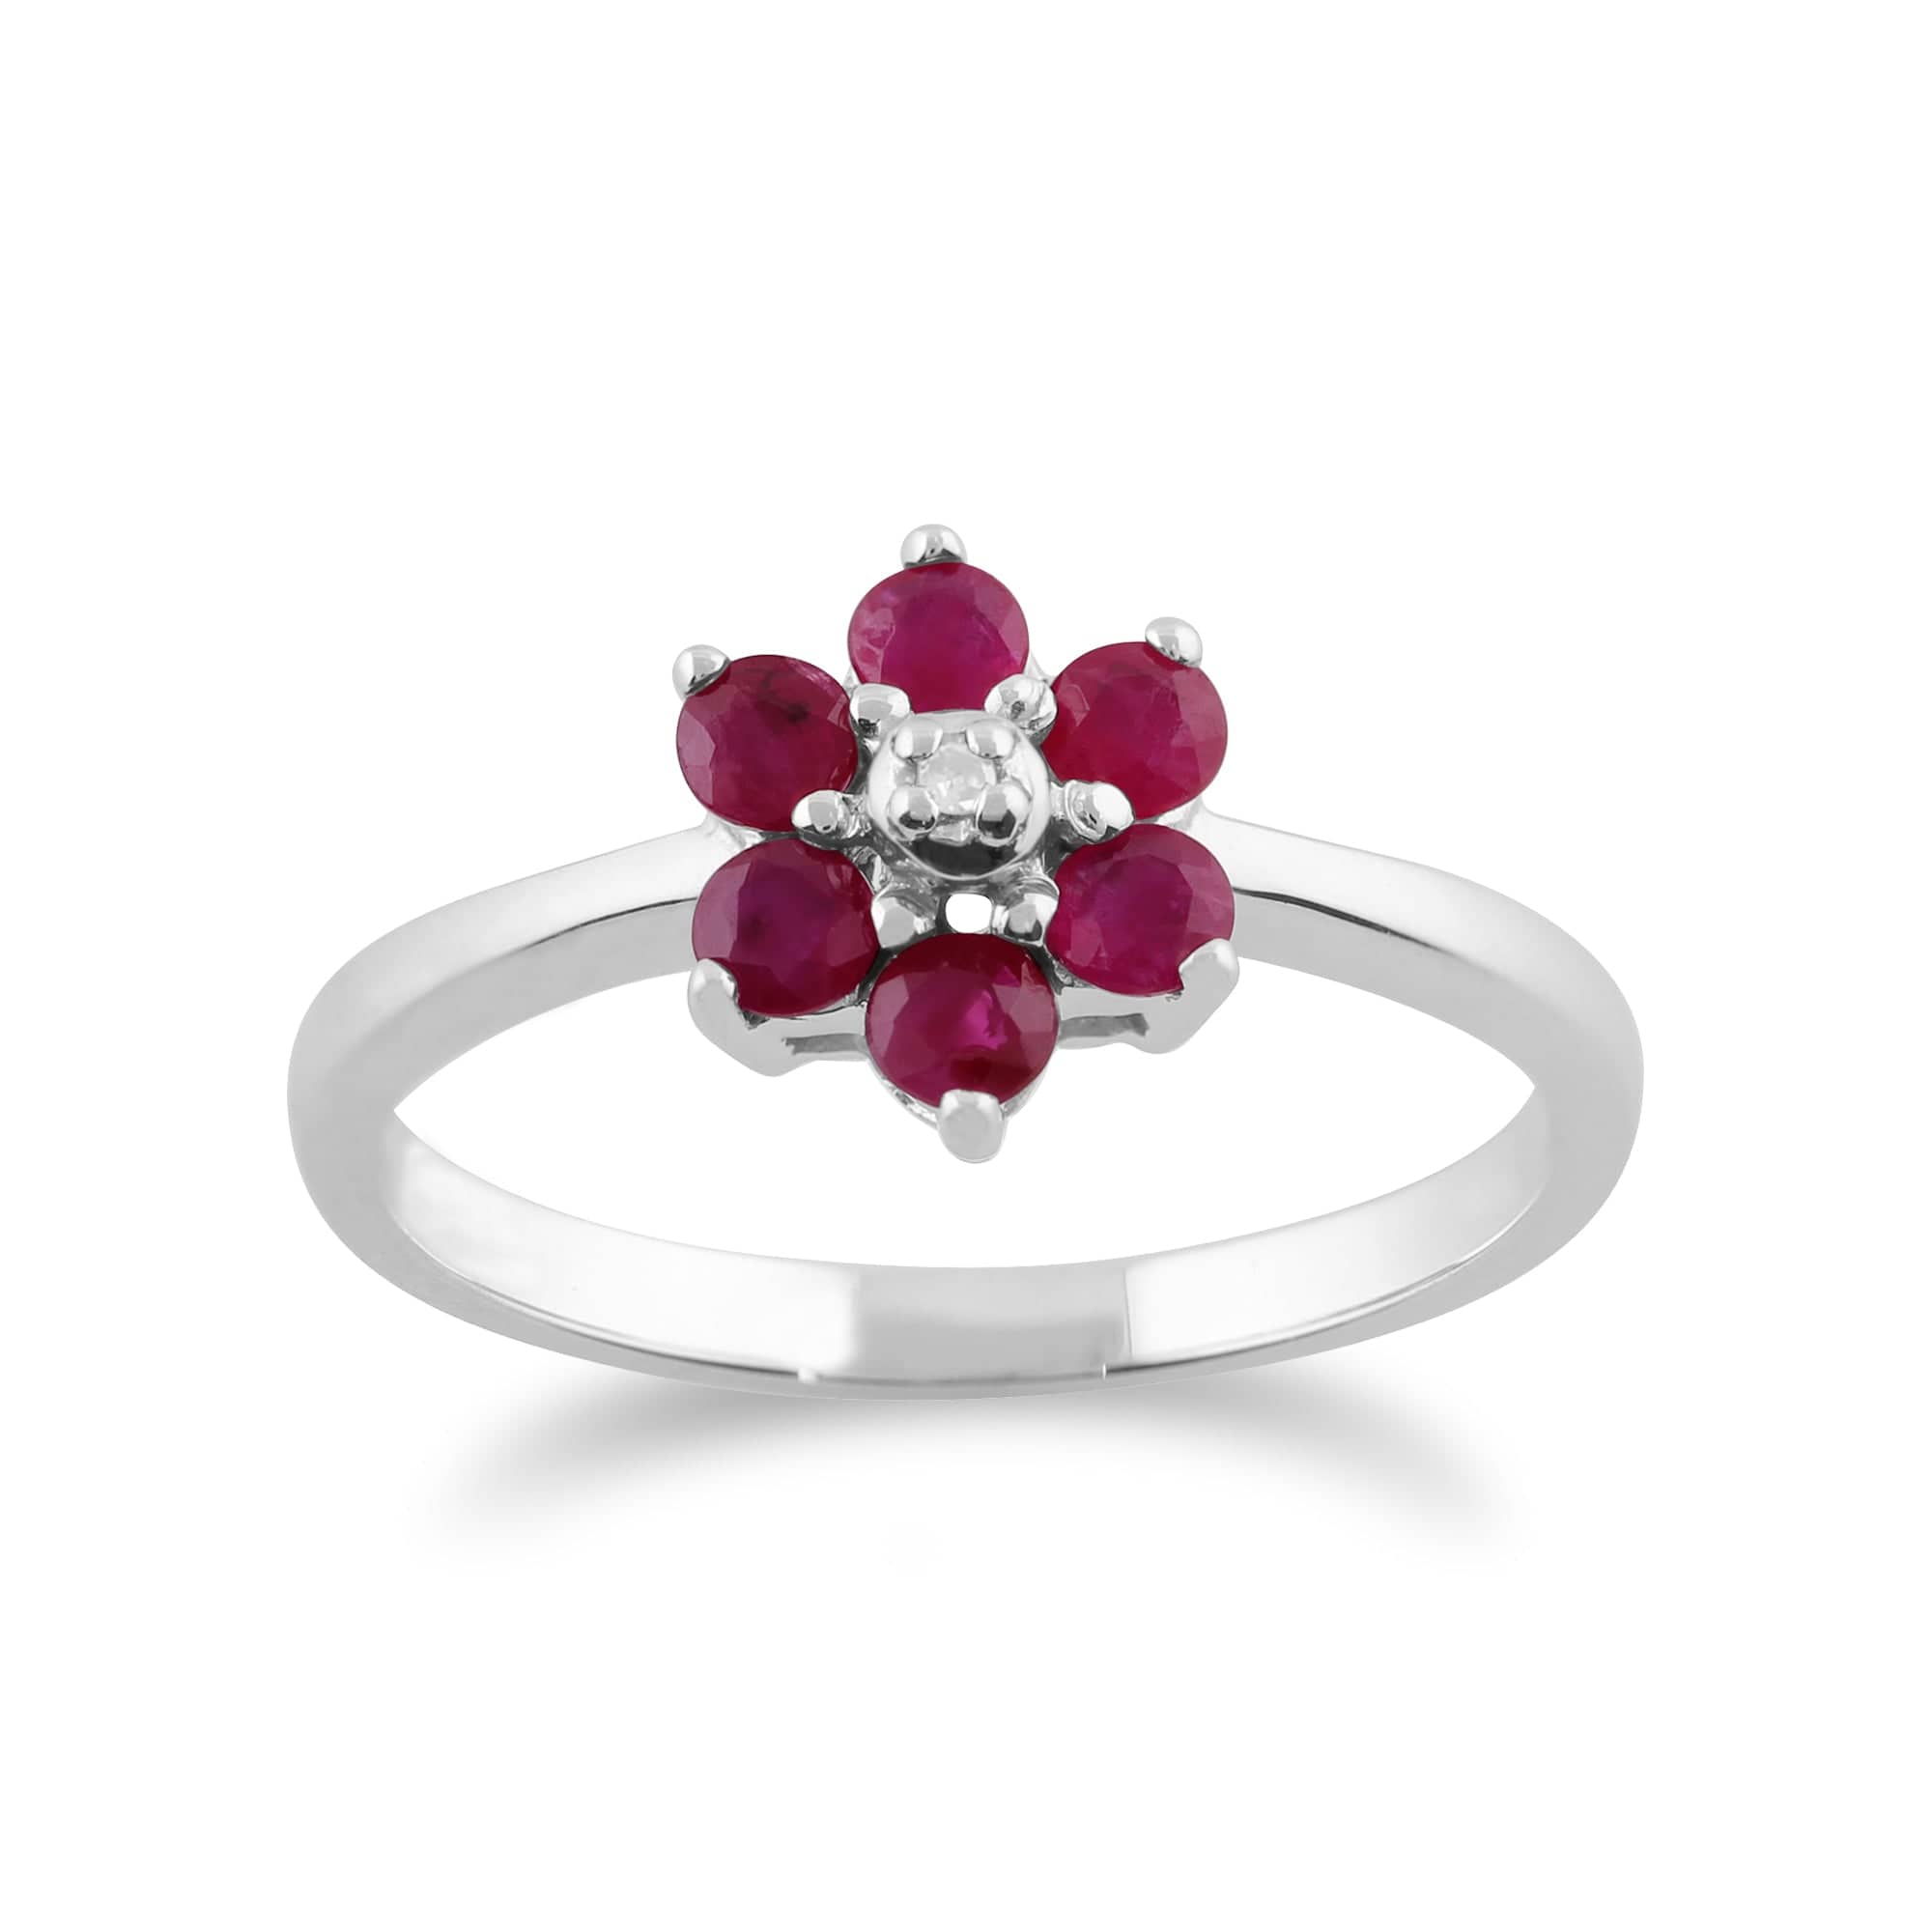 Floral Round Ruby & Diamond Cluster Ring in 9ct White Gold